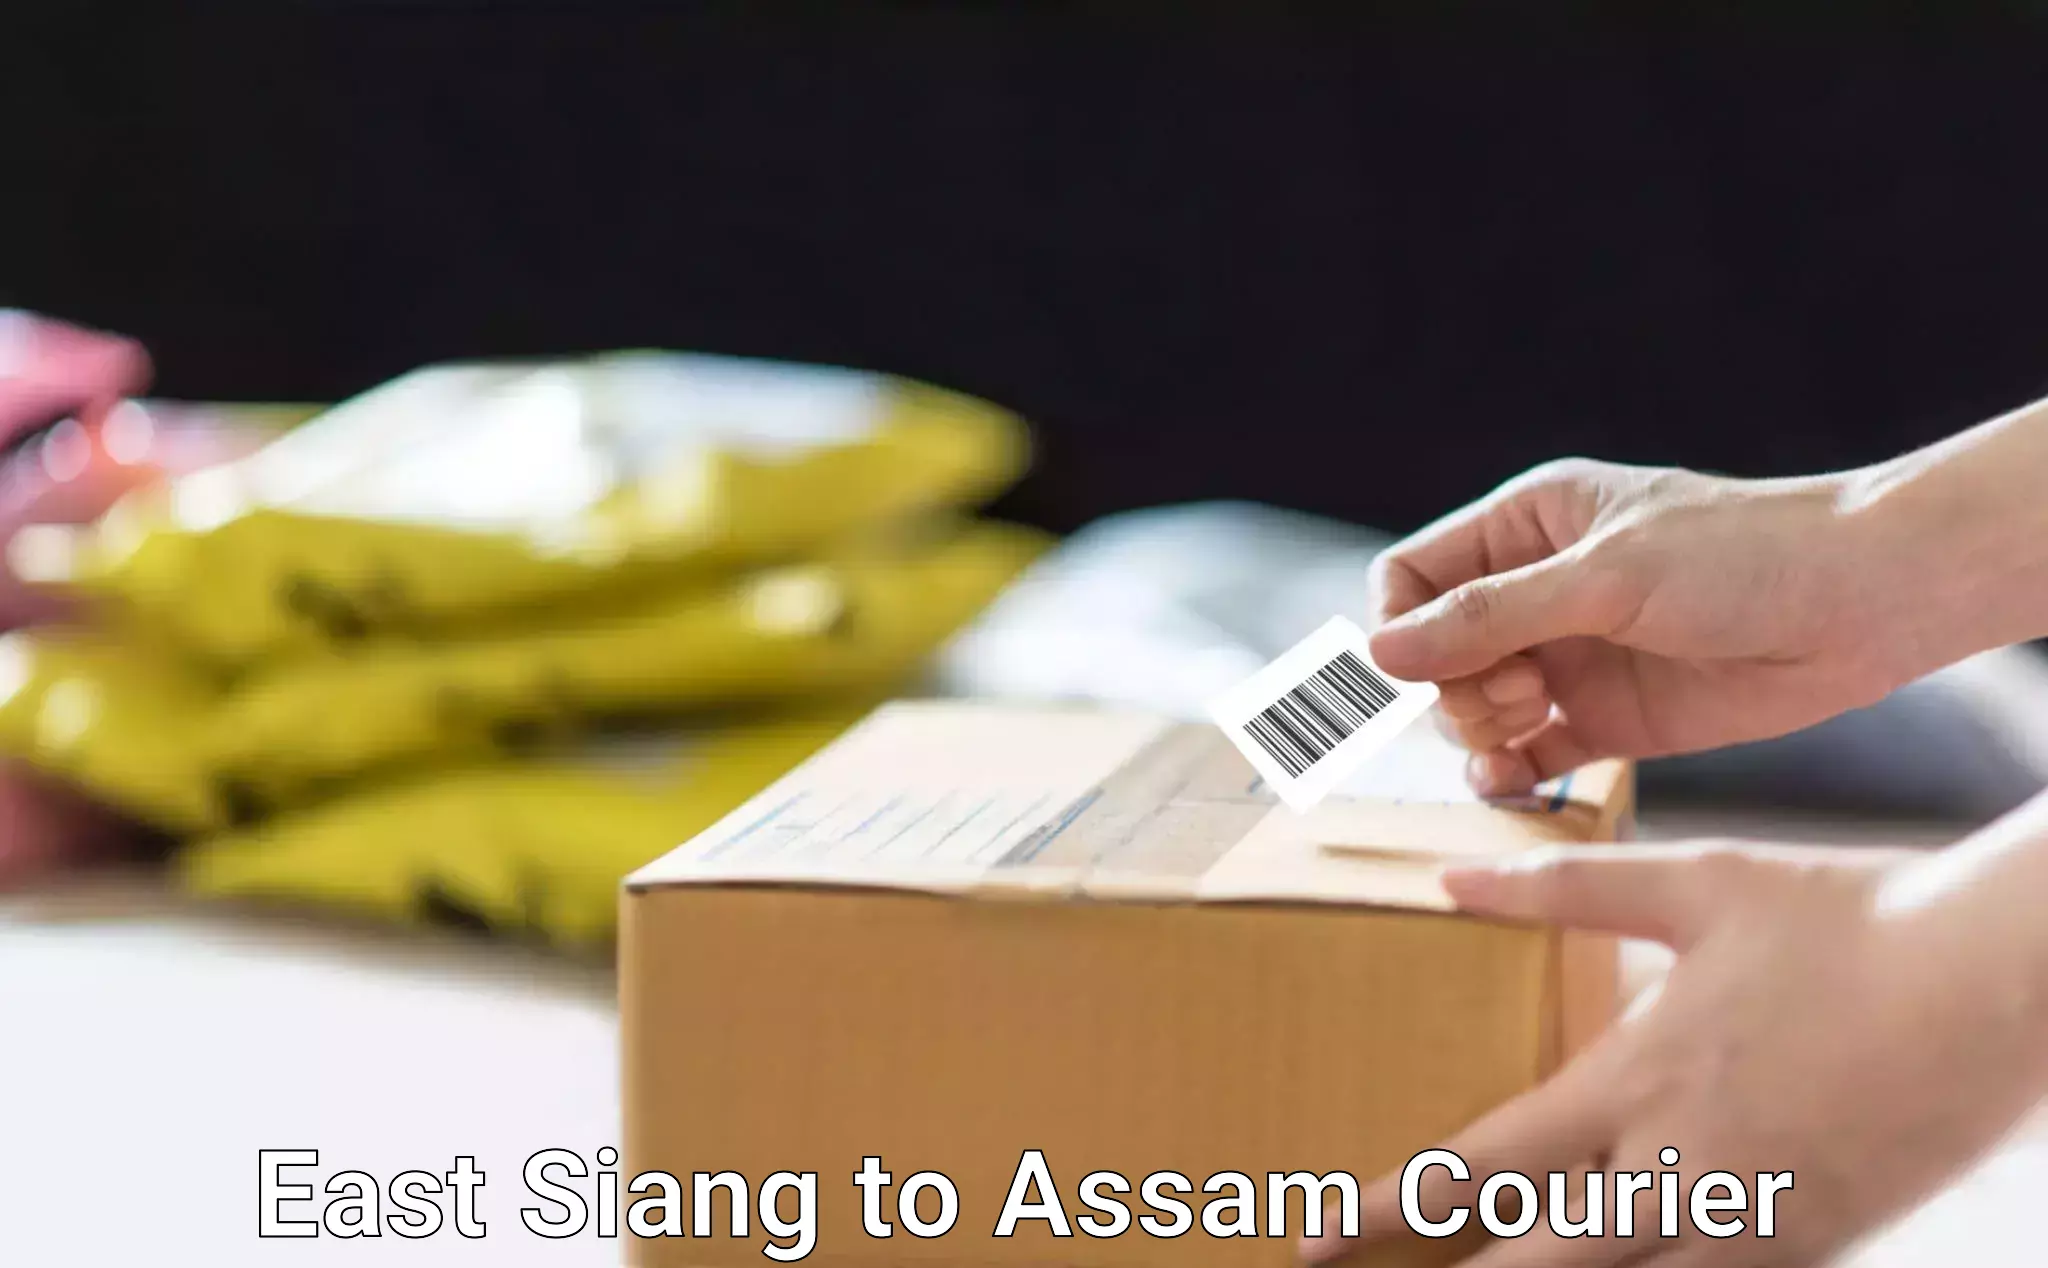 24-hour courier service East Siang to Kampur